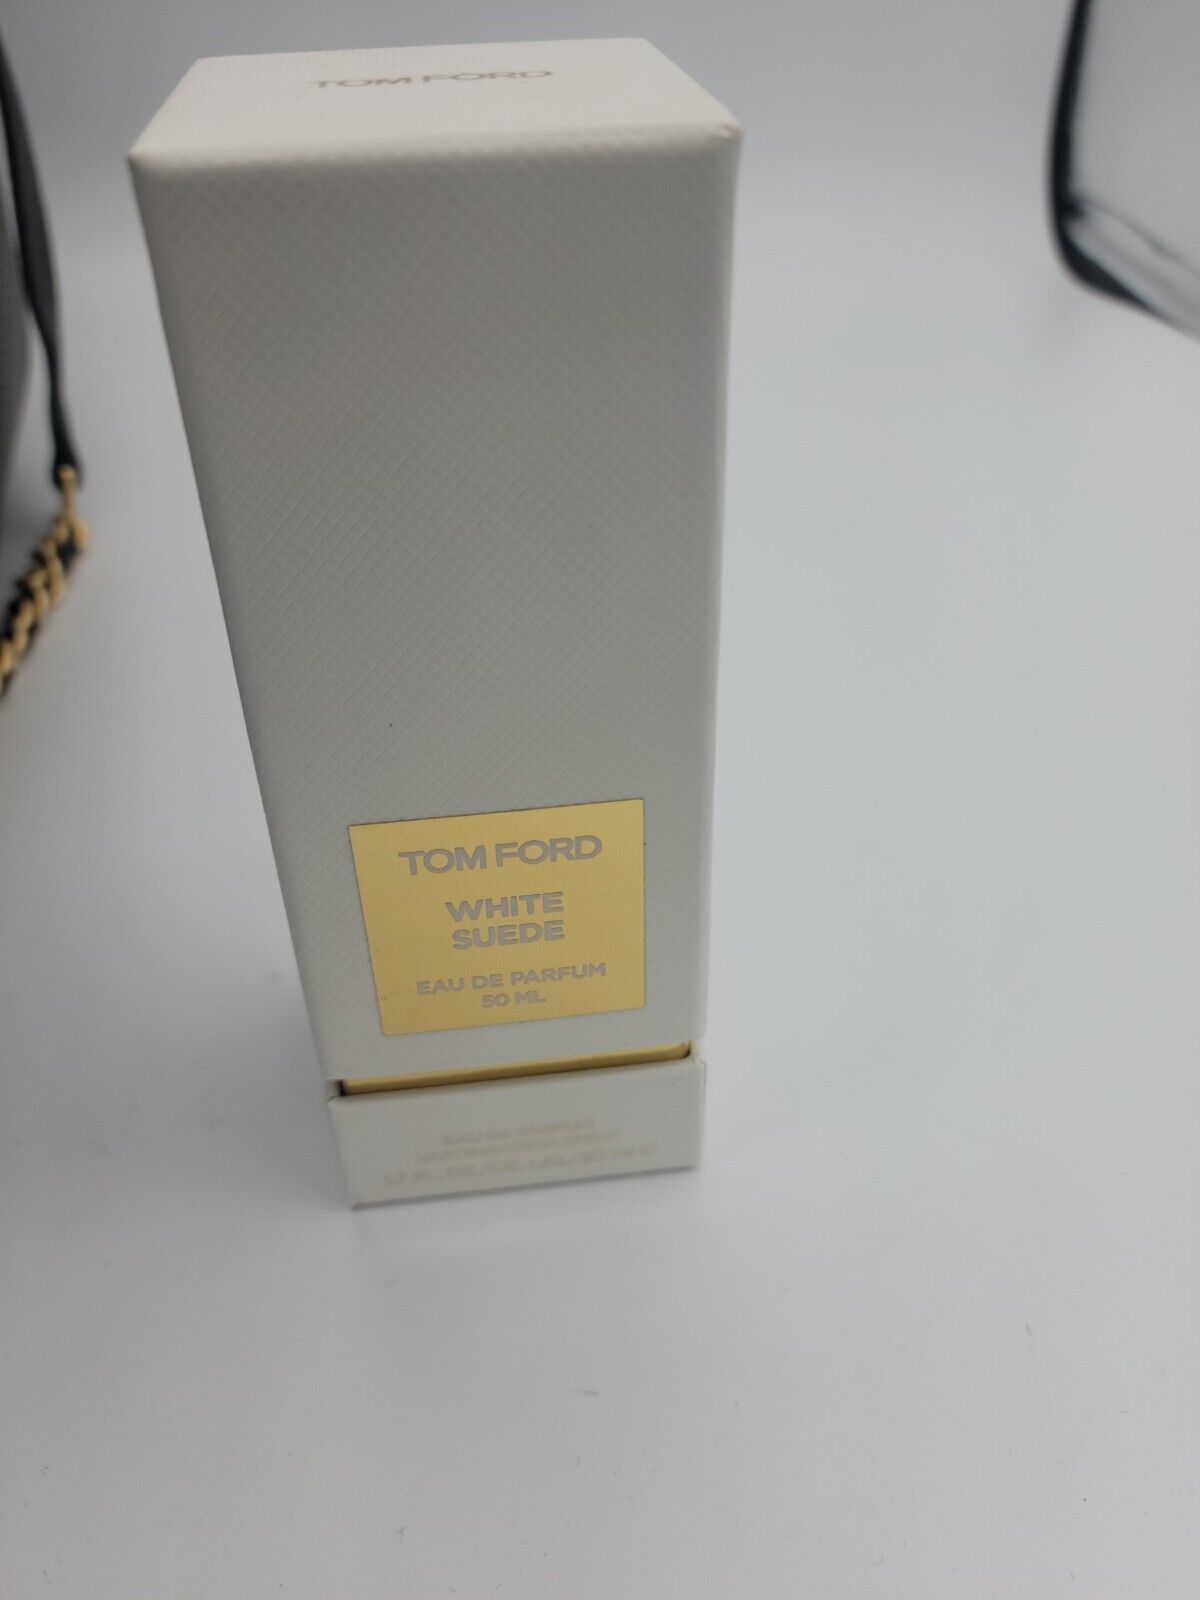 Primary image for Tom Ford White Suede Eau De Parfum 1.7oz/50ml New In Box  UNSEALED